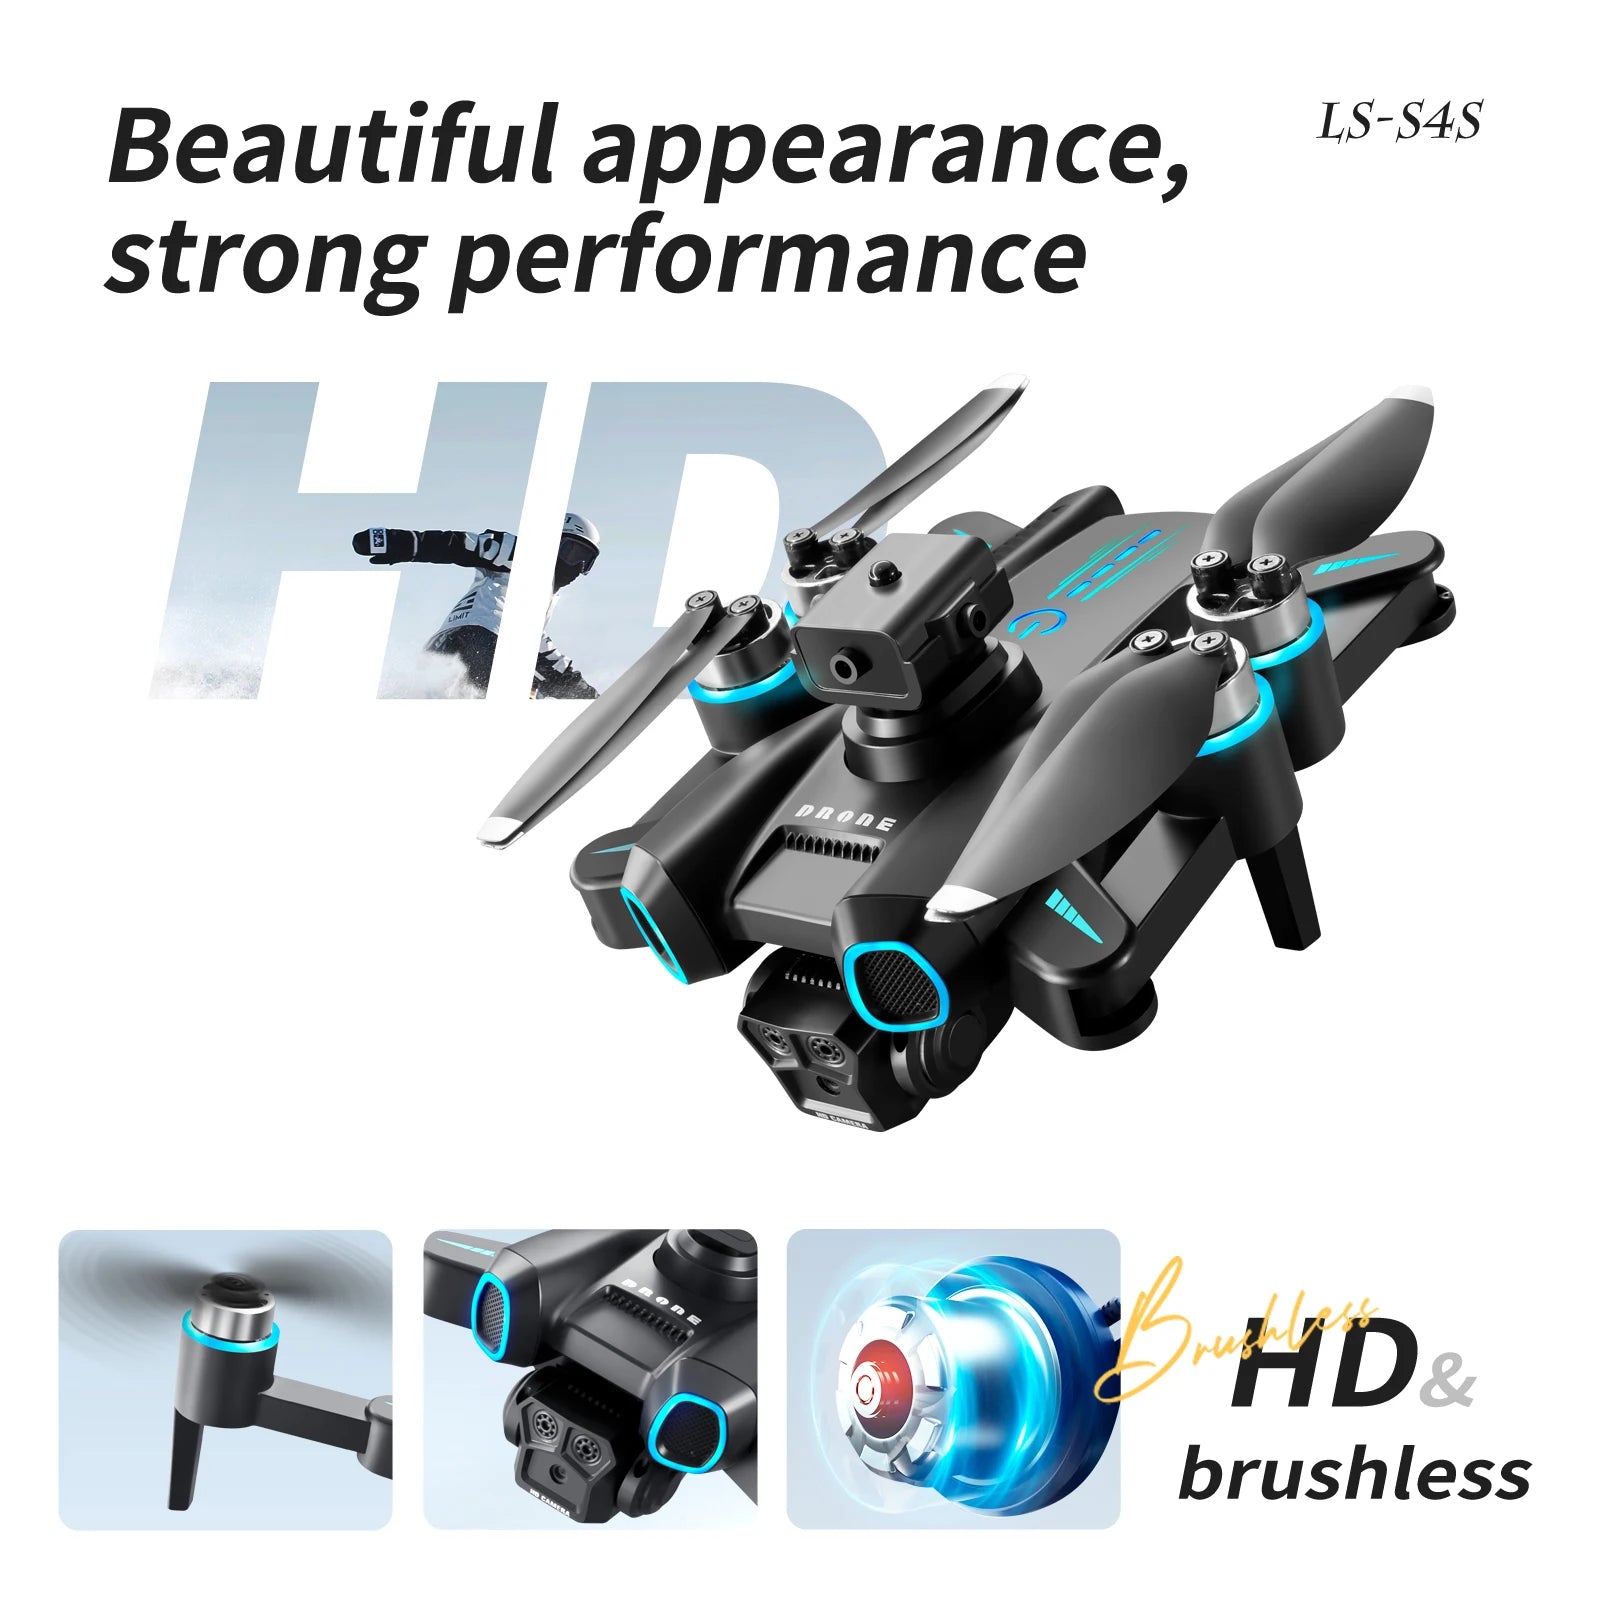 S4S Drone, Beautiful appearance, LS-S4S strong performance 5 HD & brushless Du